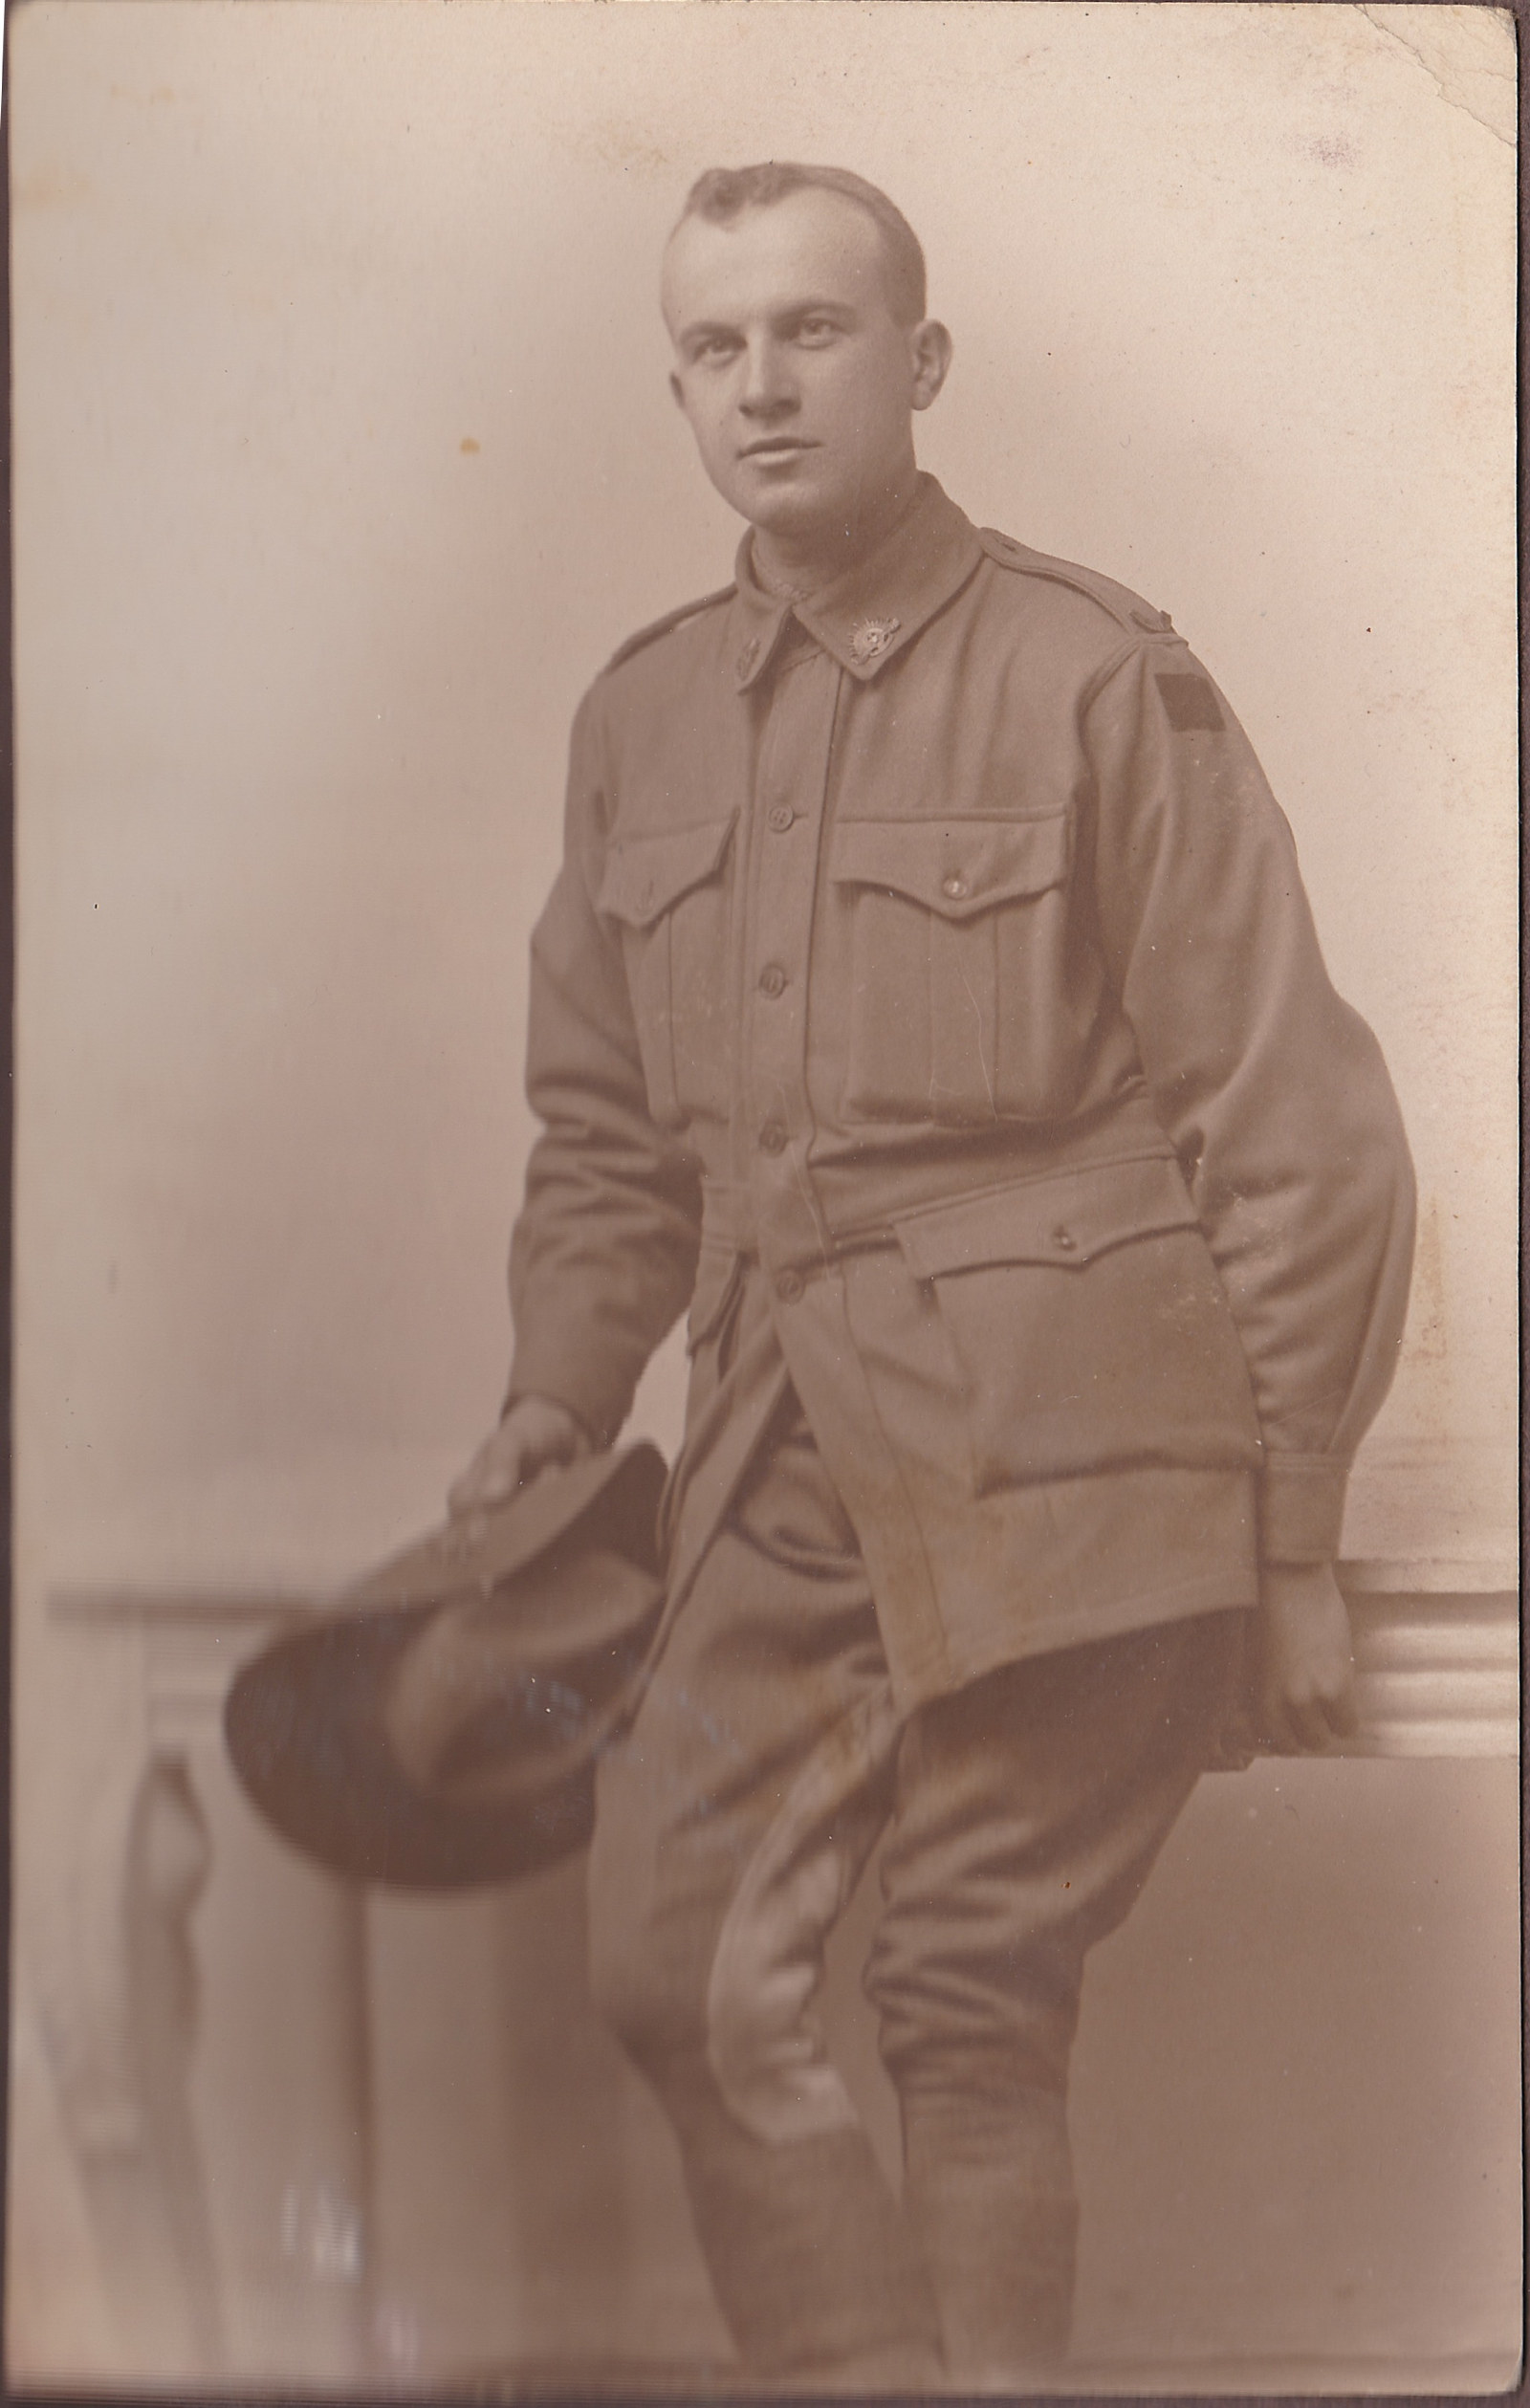 Private Arthur McPhail Kilgour (1896-1941), photographed in France in late 1917 or early 1917